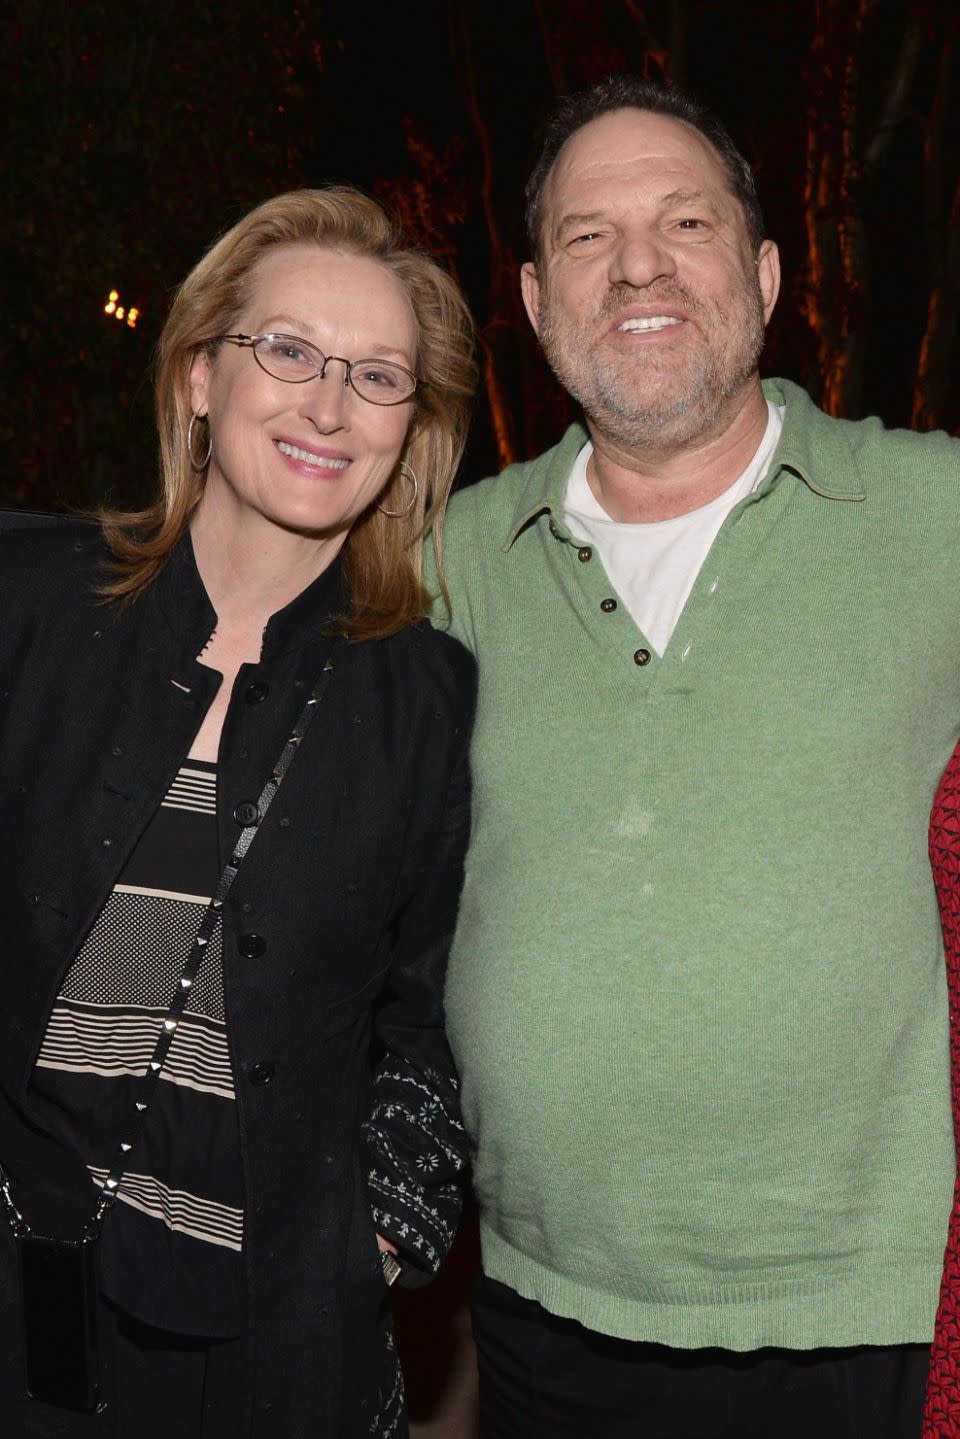 Meryl seen here with Weinstein 2014, before he was accused of sexual abuse. Source: Getty